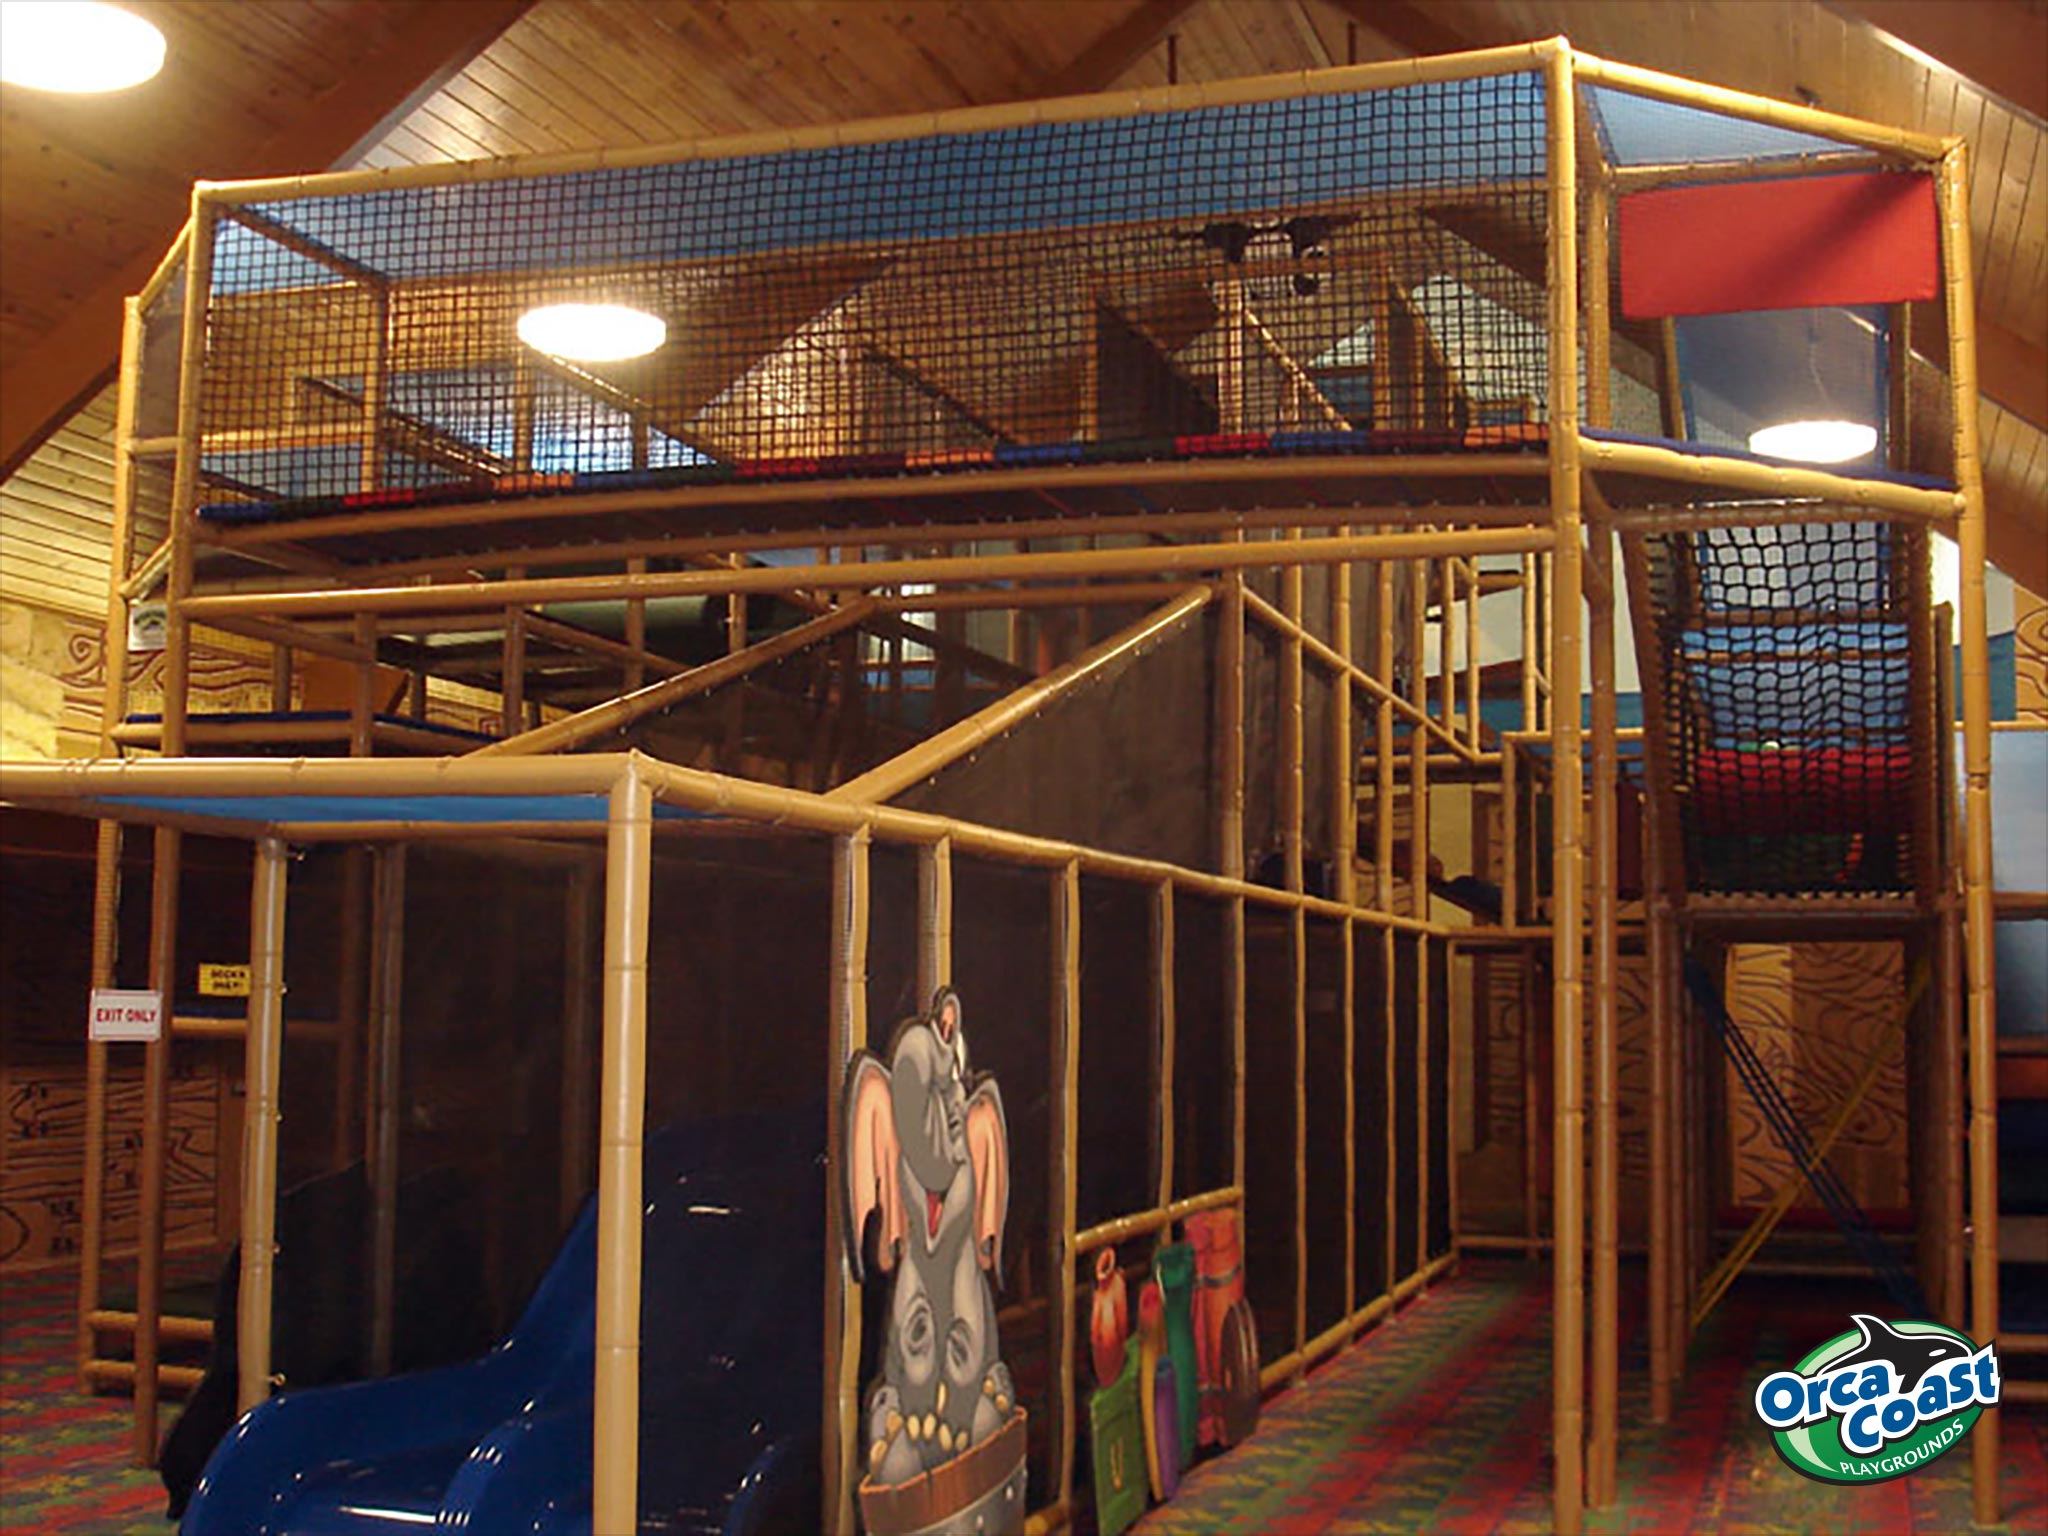 The indoor playground at First Baptist Church of Coppell